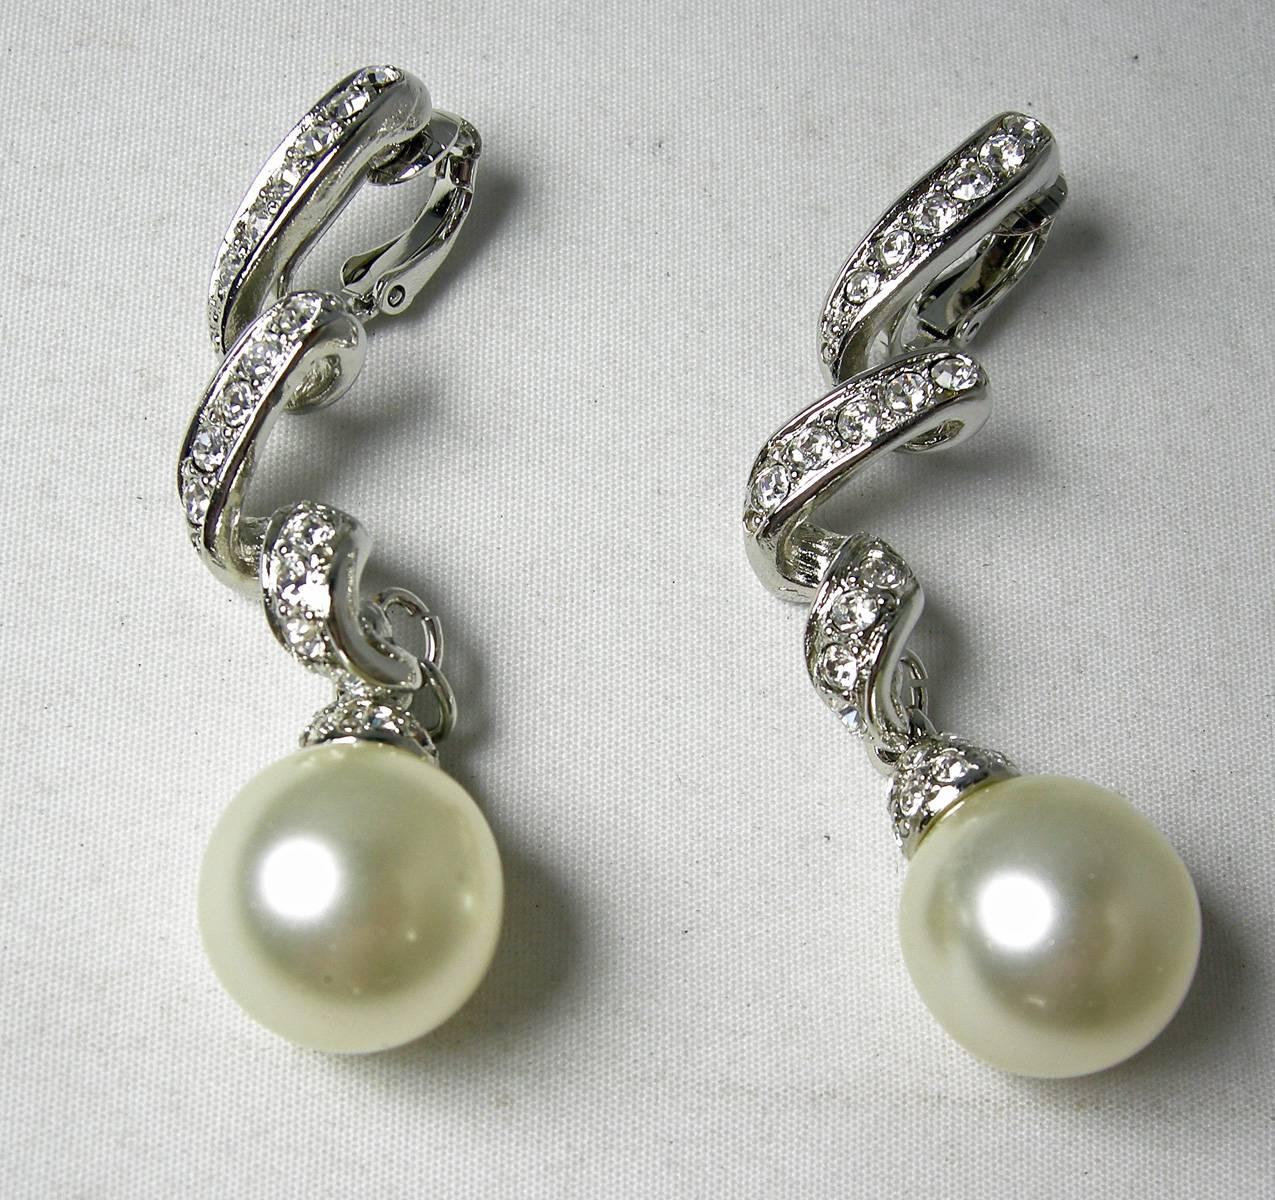 These sparkling clip earrings display gorgeous faux drop pearls that dangle from a swirl design encrusted with rhinestones. The bottom of the earrings has pave rhinestone caps. The earrings are made in a silver tone rhodium setting.  They measure 2”